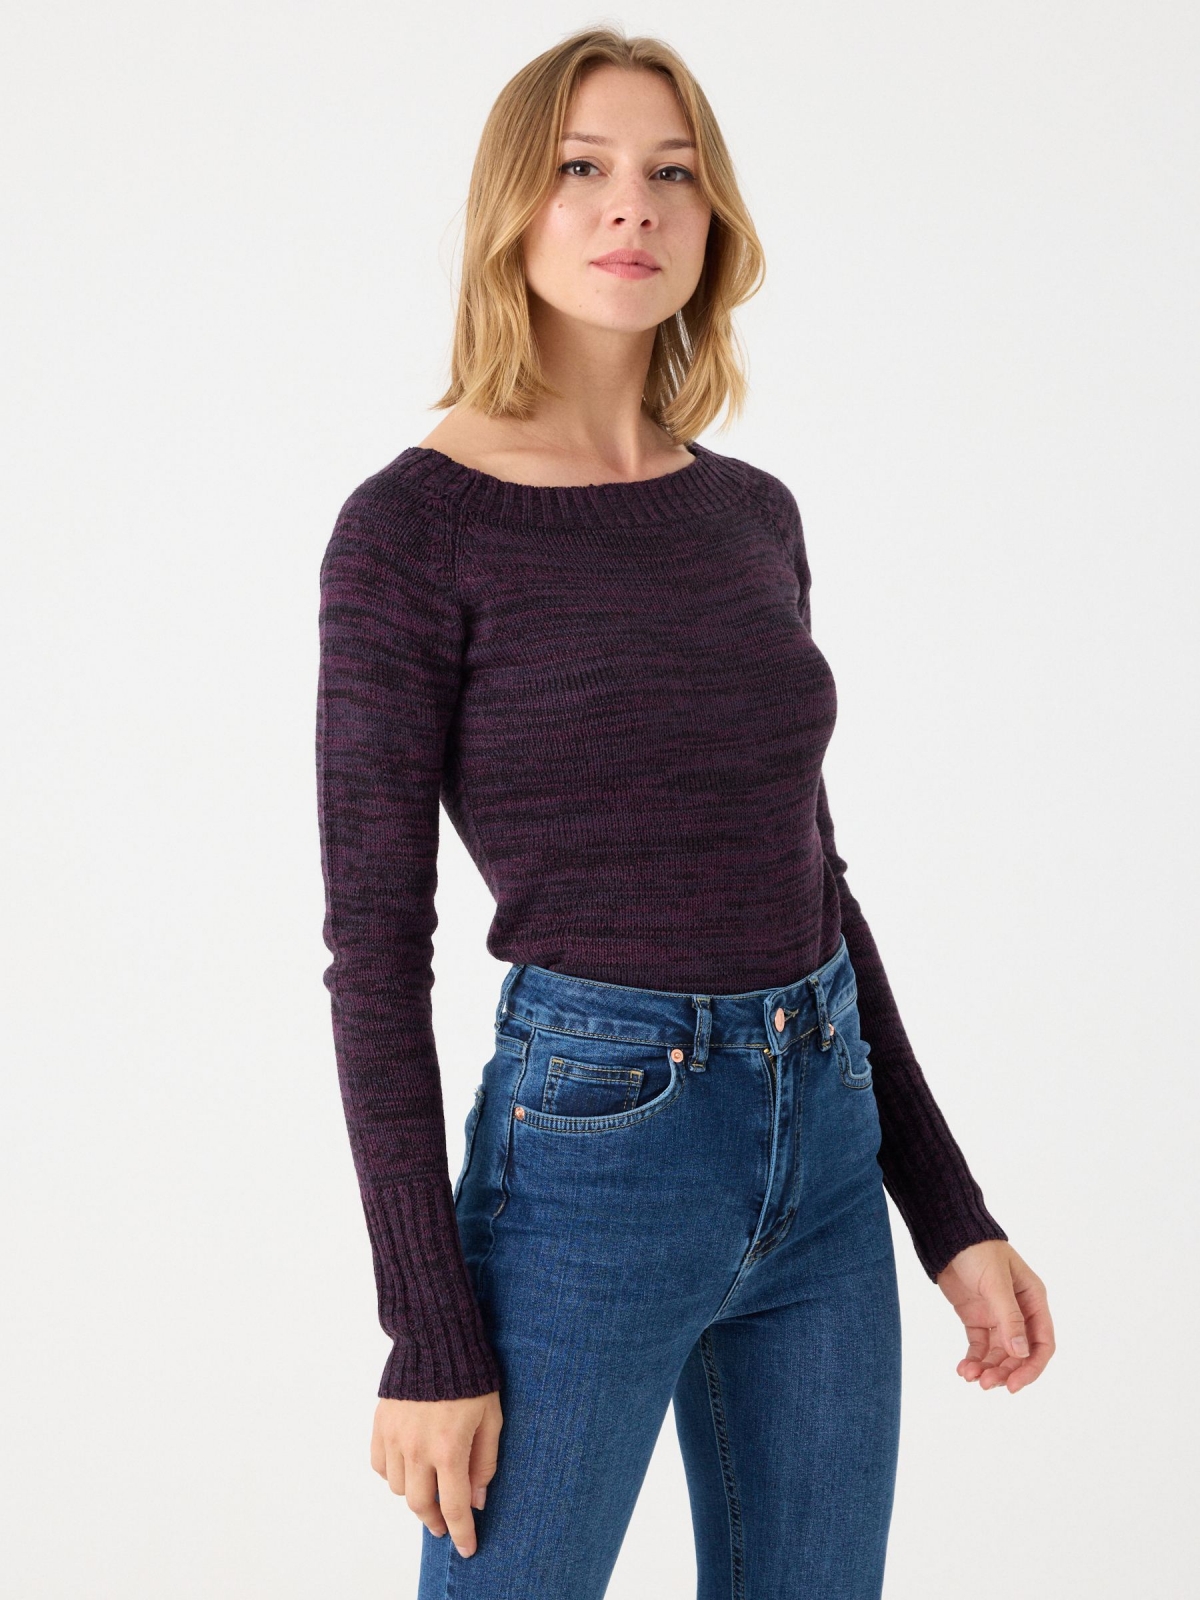 Marbled boat sweater aubergine middle front view